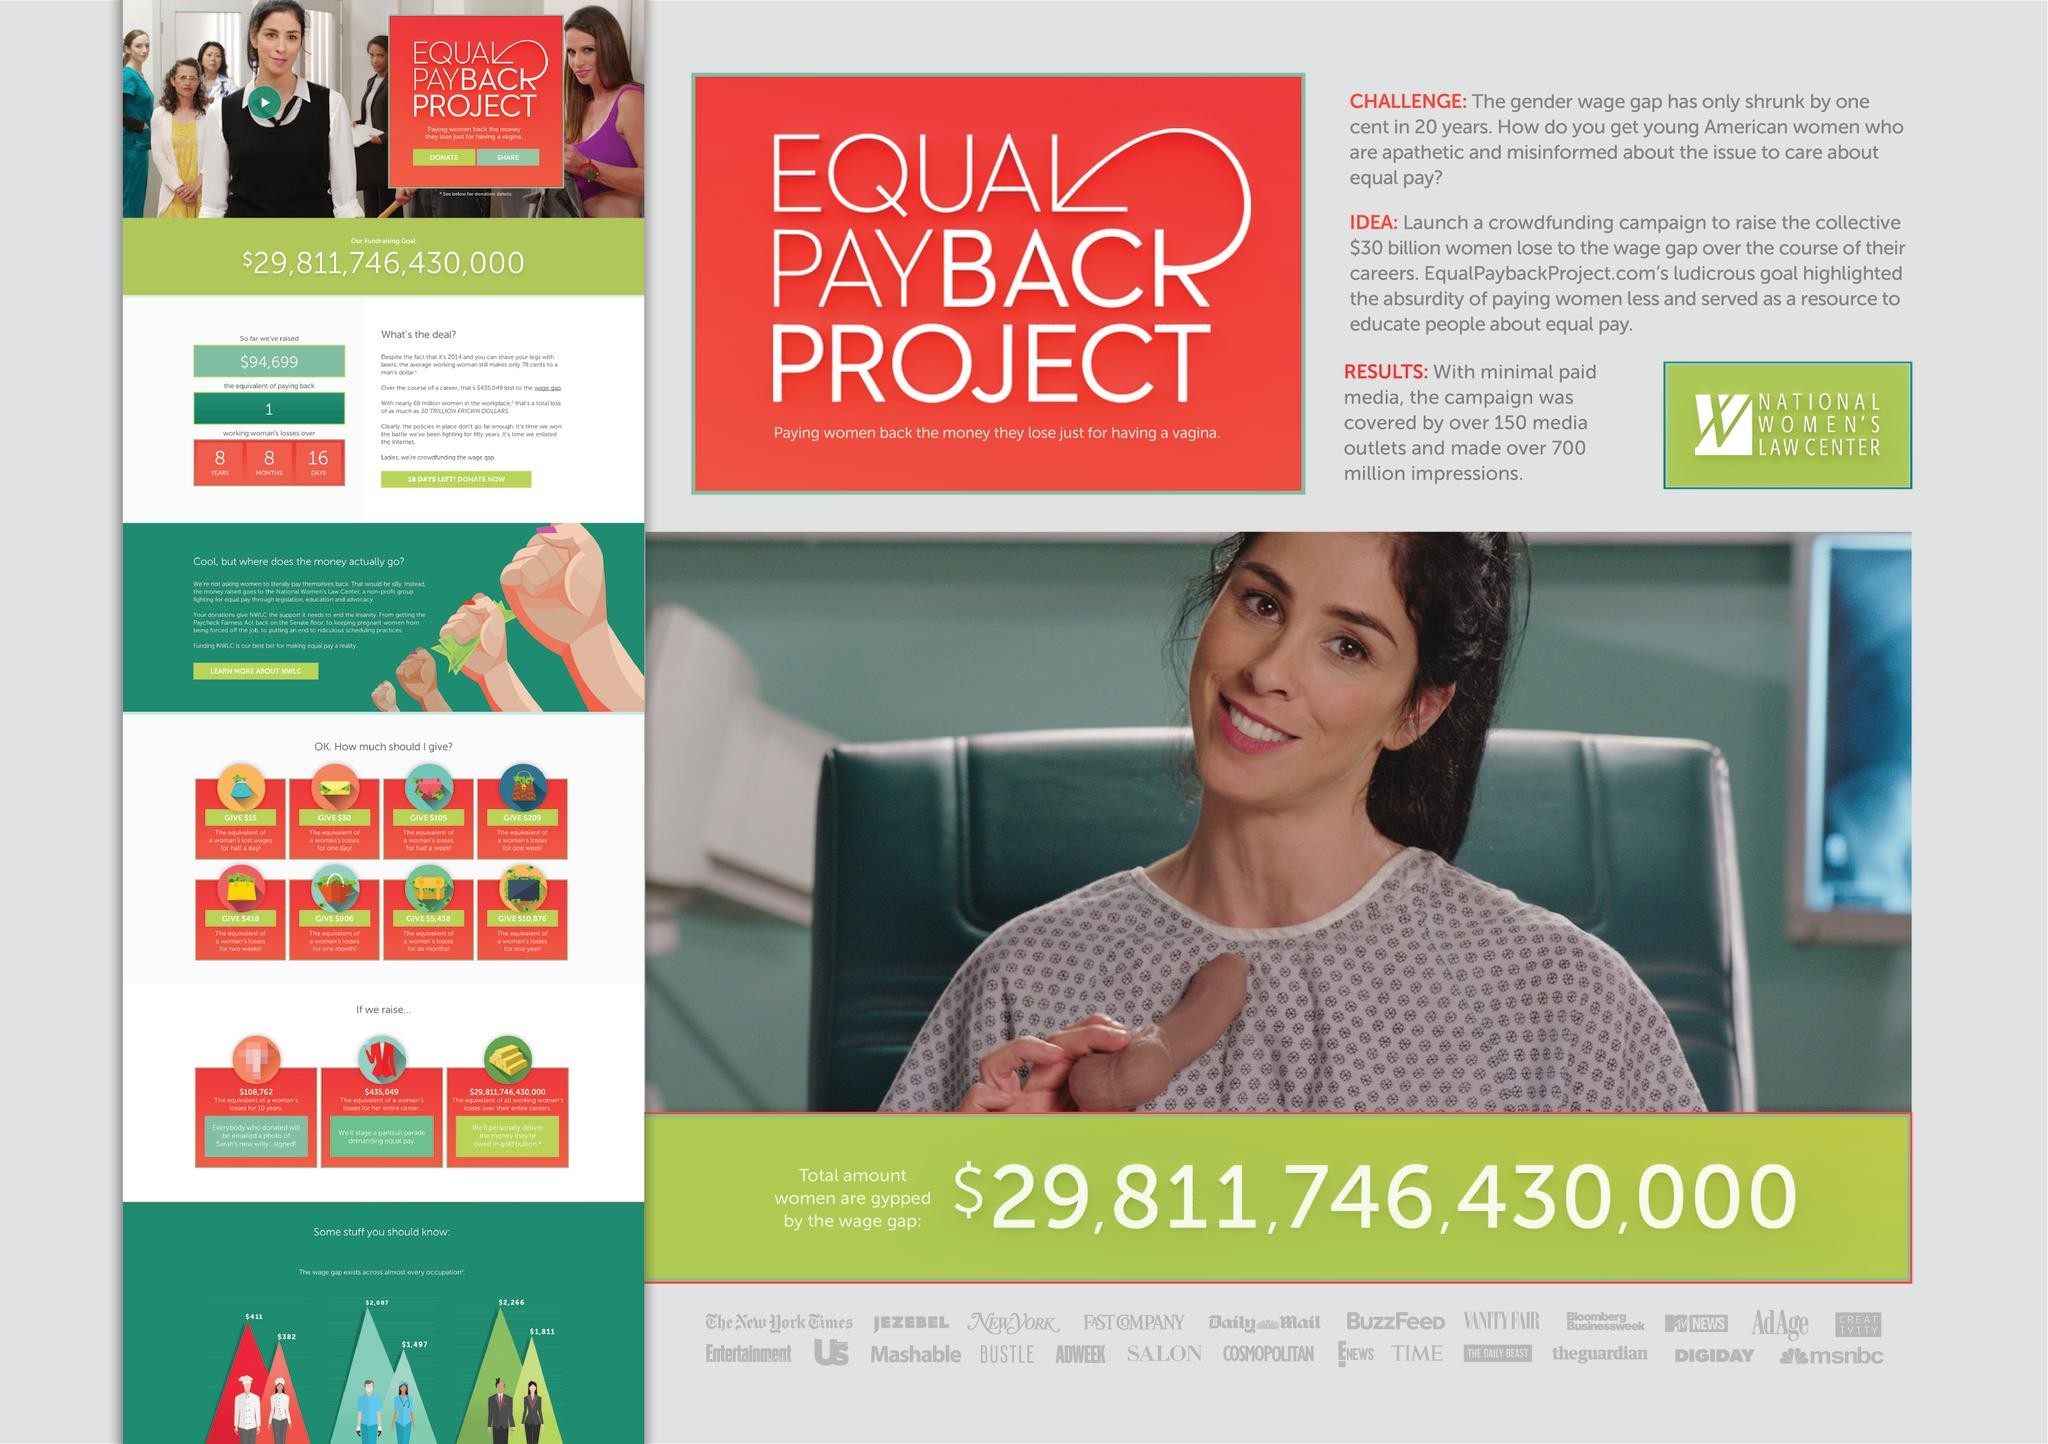 THE EQUAL PAY BACK PROJECT